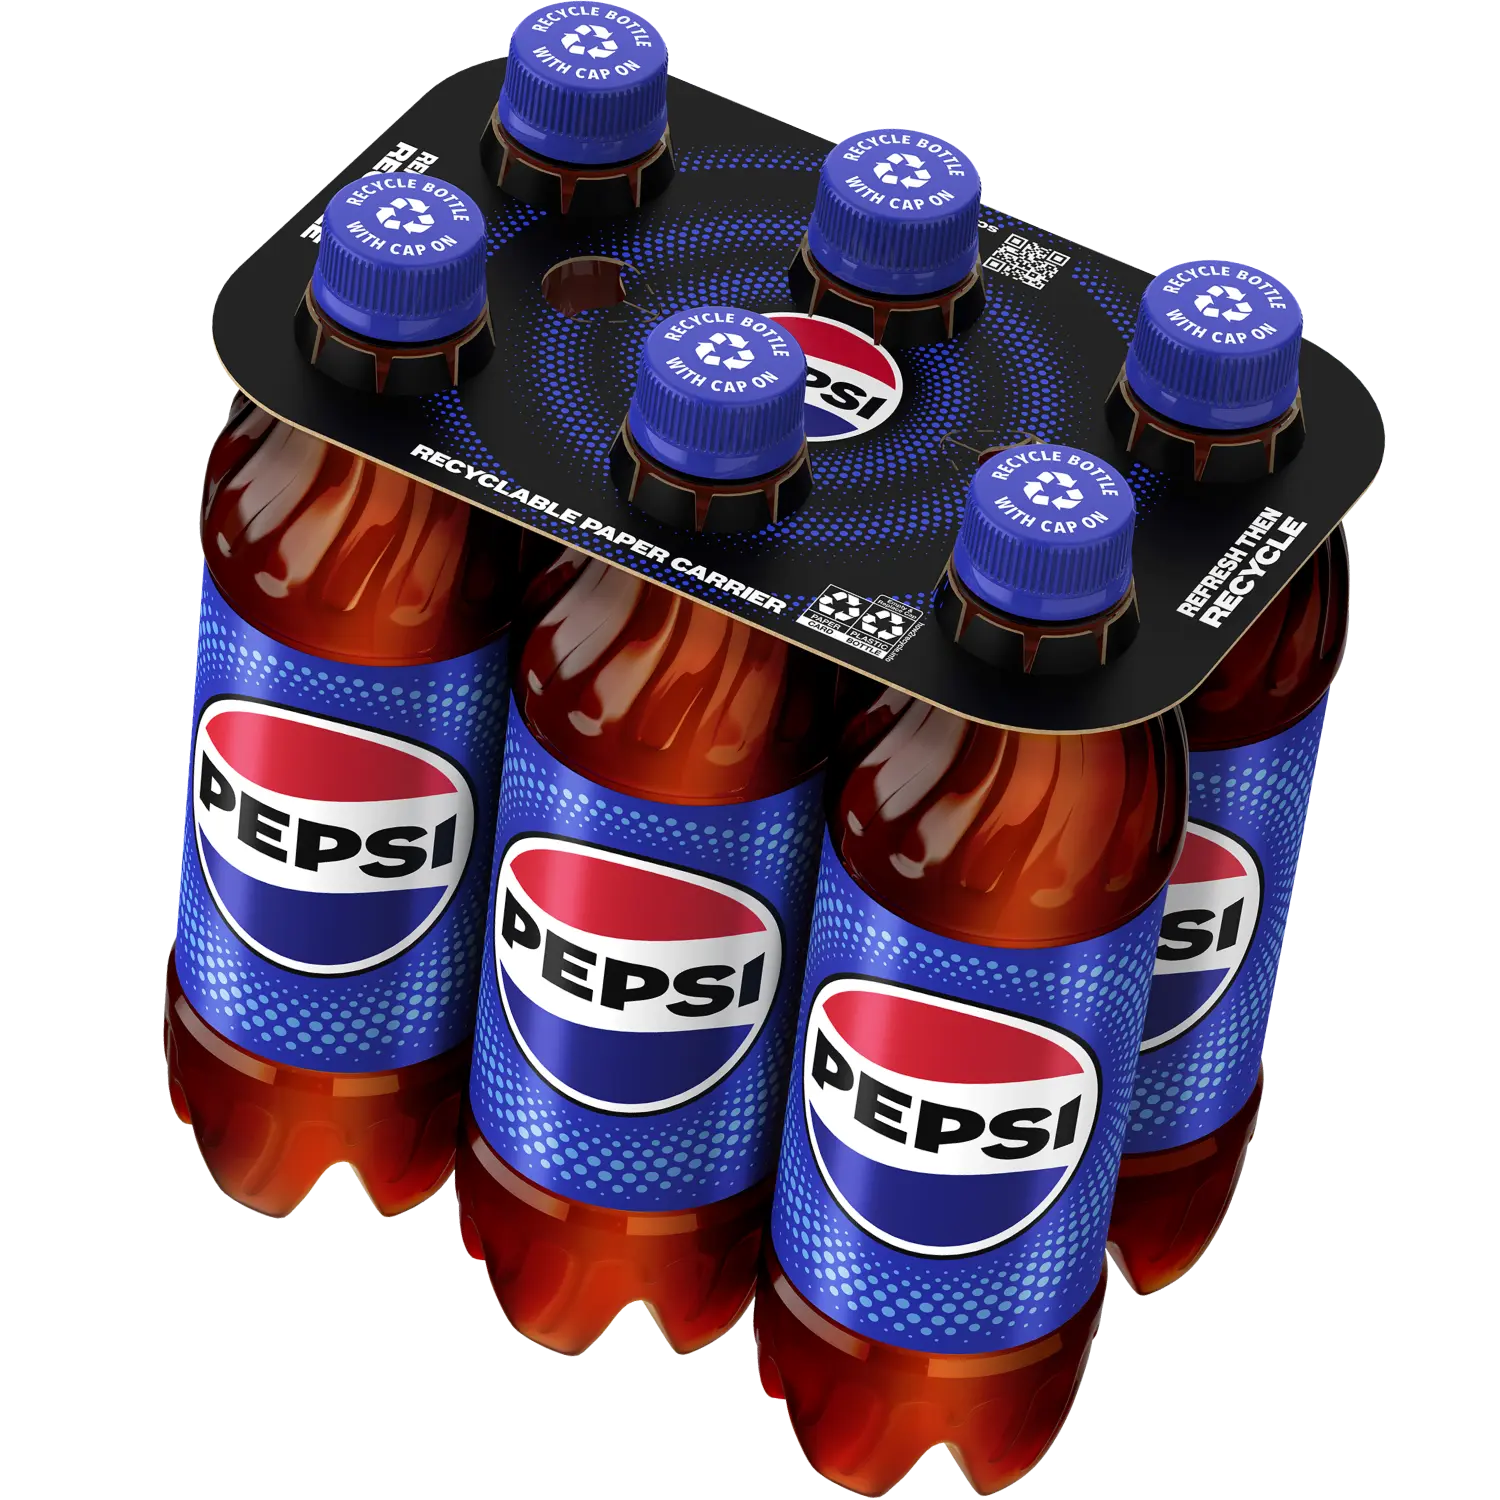 6 pack of Pepsi bottles with a recyclable paper carrier